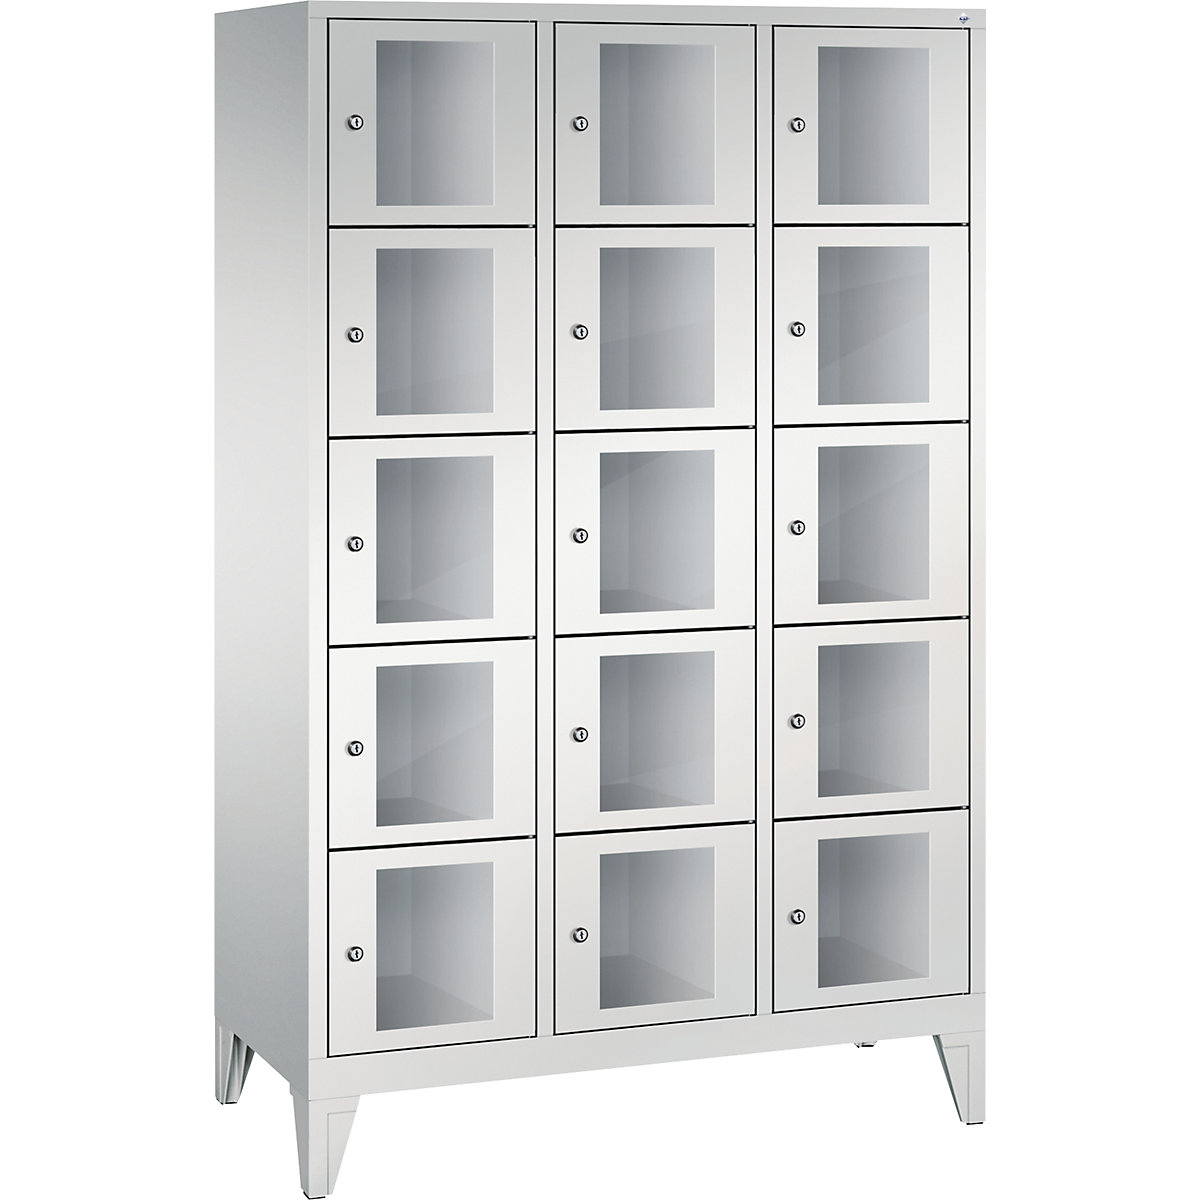 C+P – CLASSIC locker unit, compartment height 295 mm, with feet, 15 compartments, width 1200 mm, light grey door